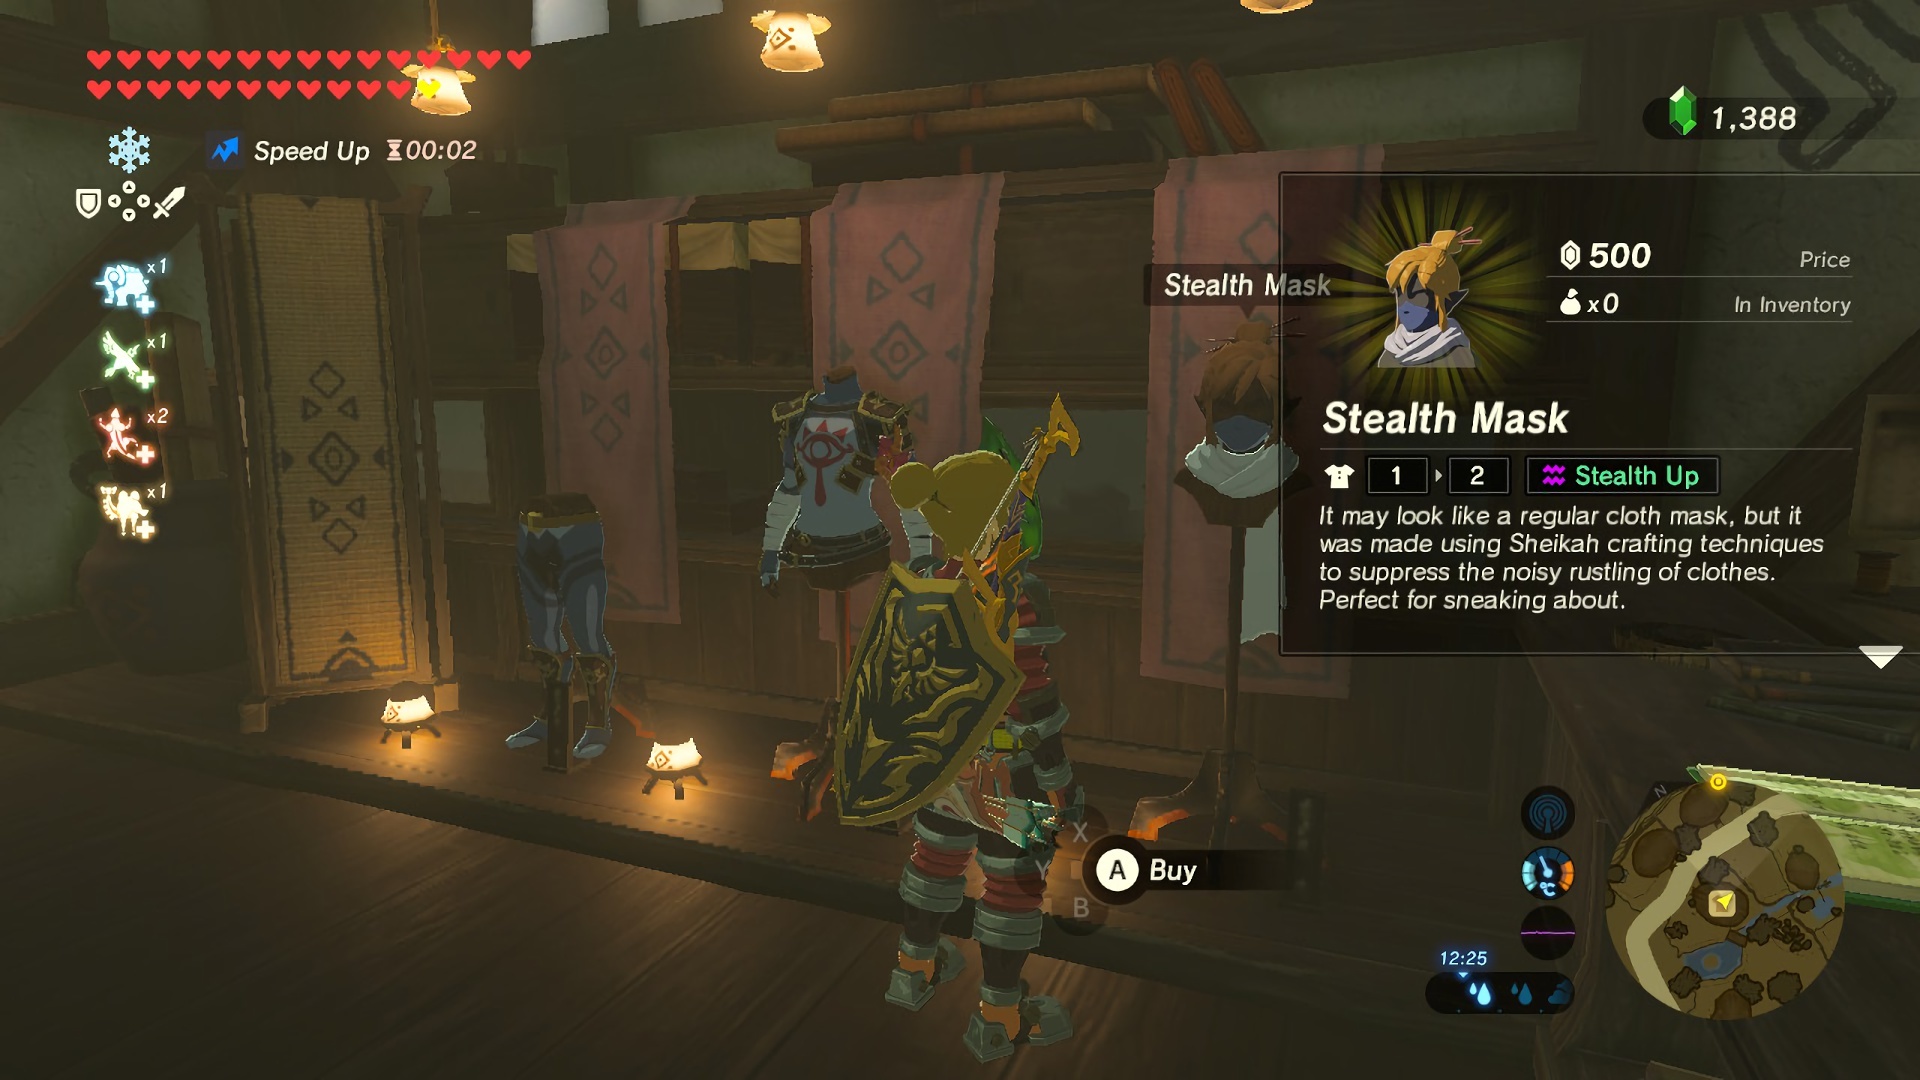 The Legend of Zelda: Breath of the Wild, Interface In Game